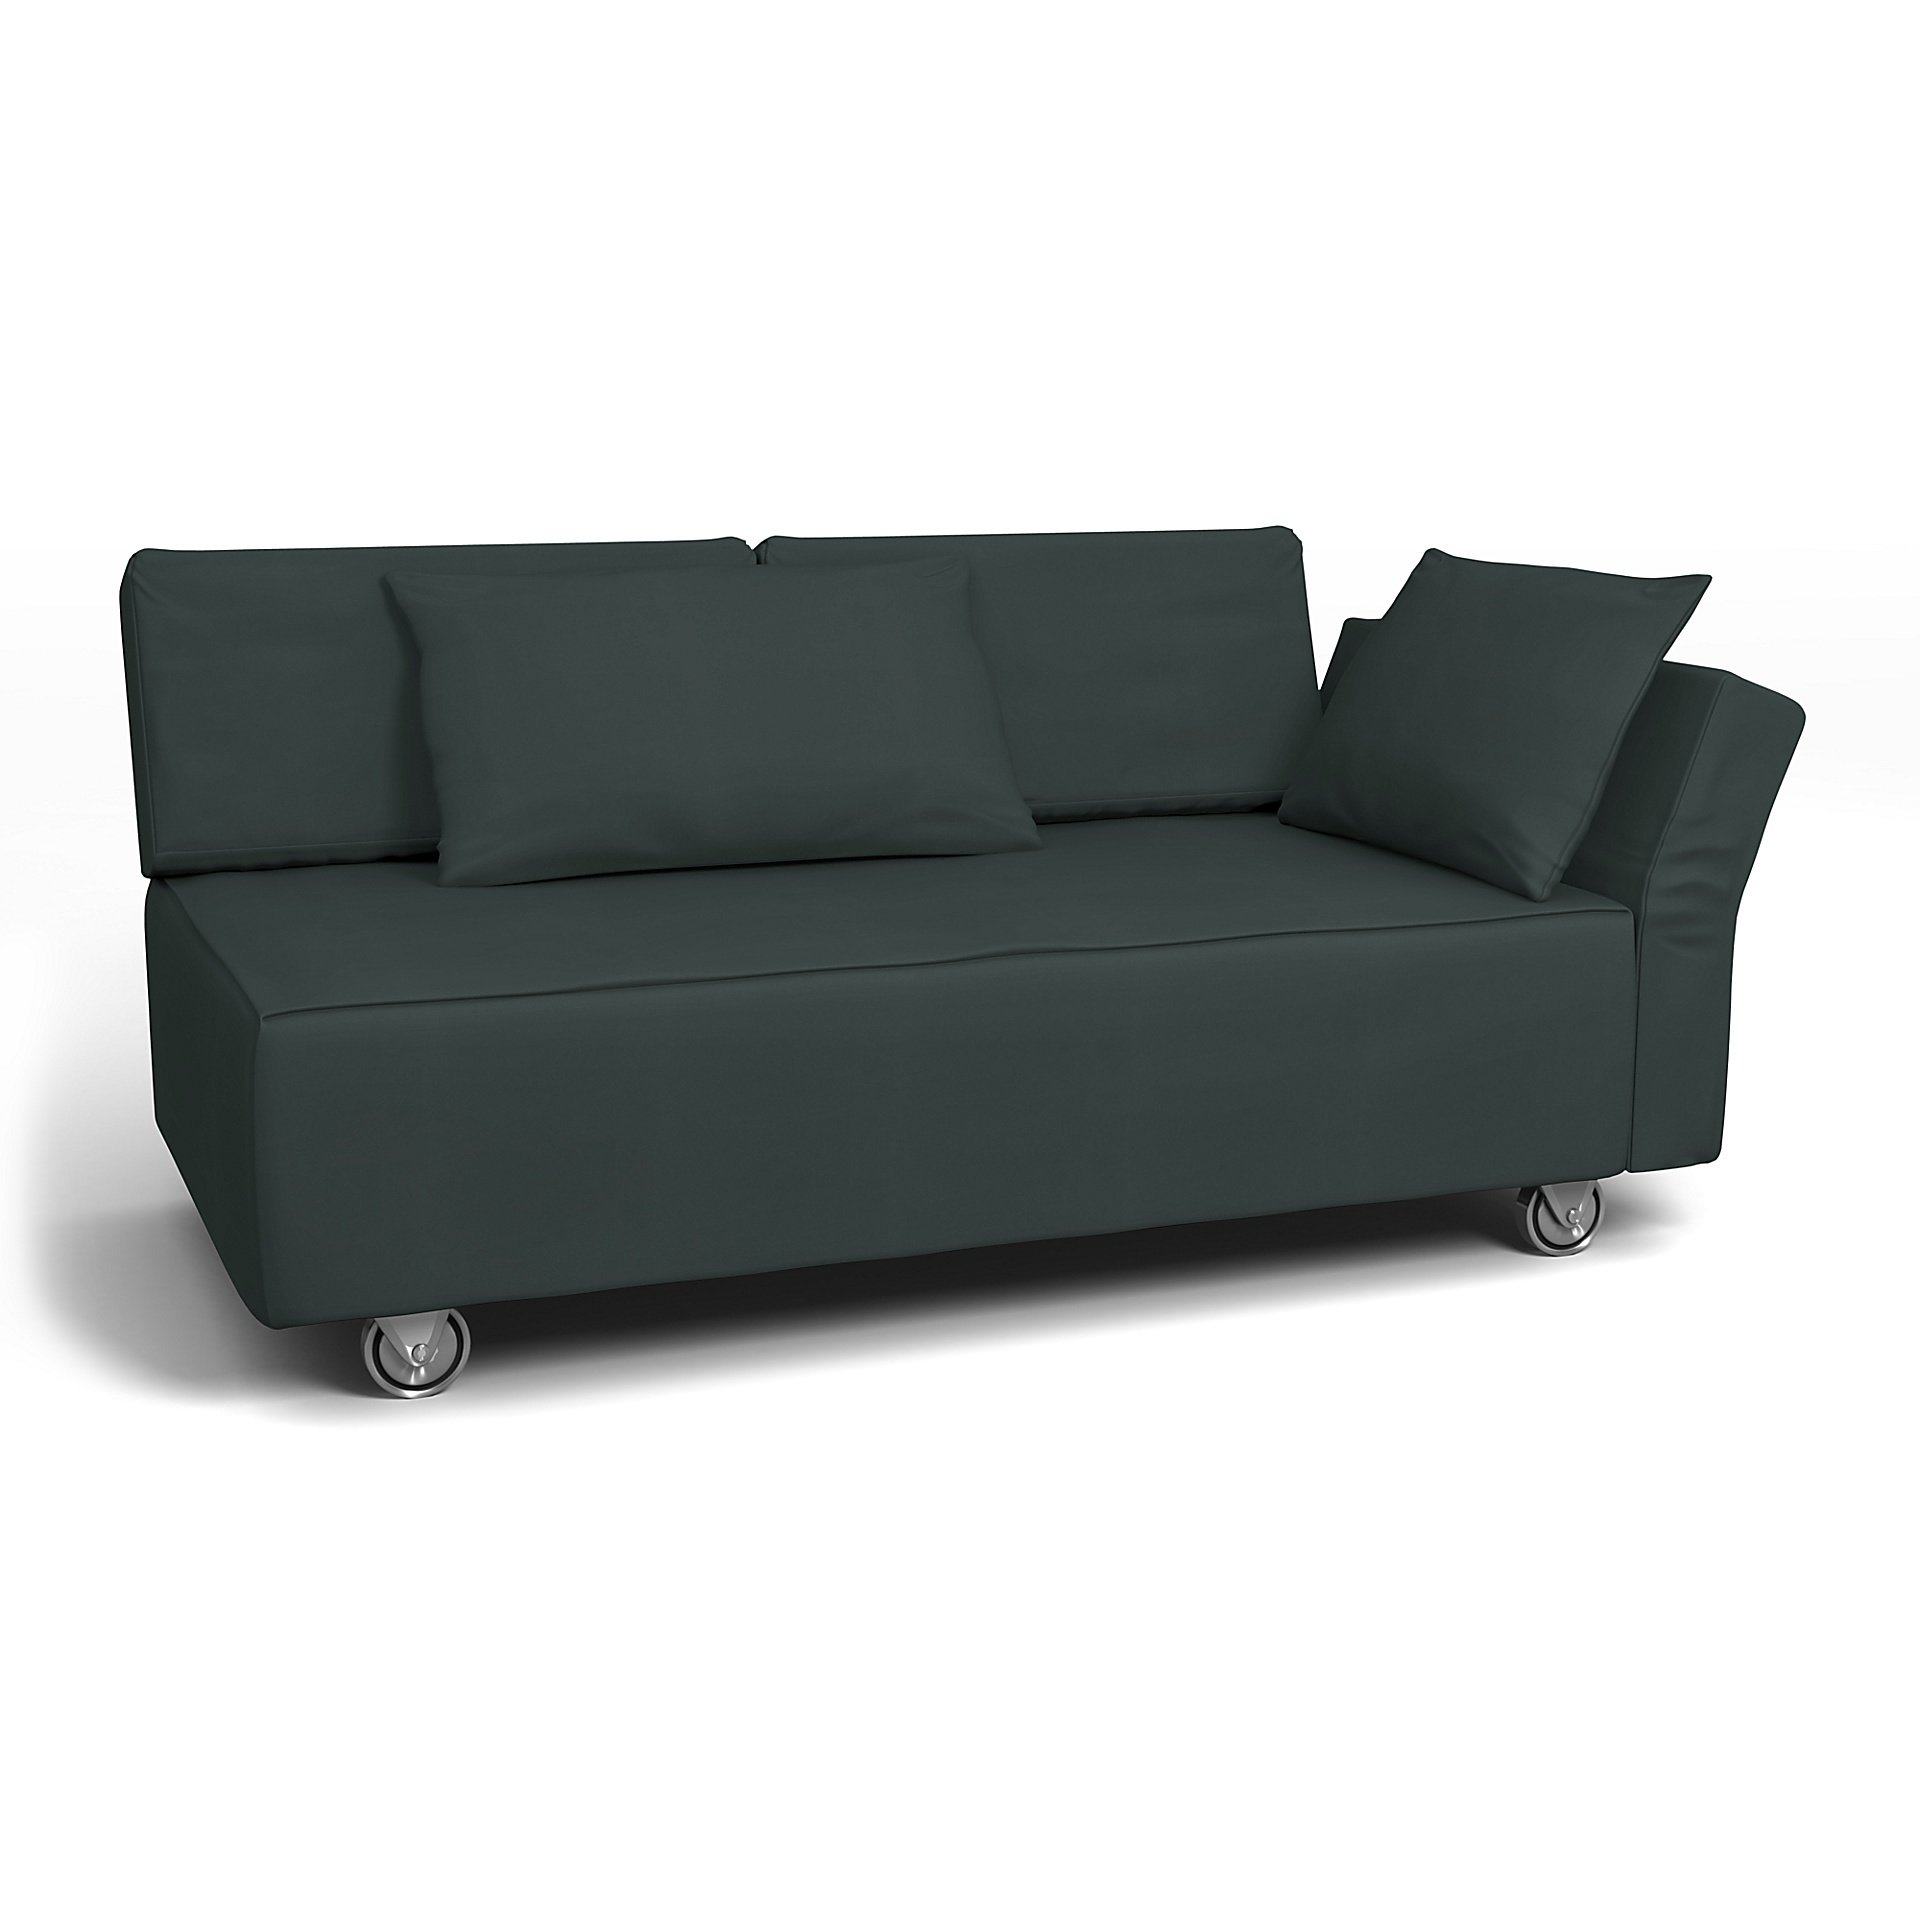 IKEA - Falsterbo 2 Seat Sofa with Right Arm Cover, Graphite Grey, Cotton - Bemz